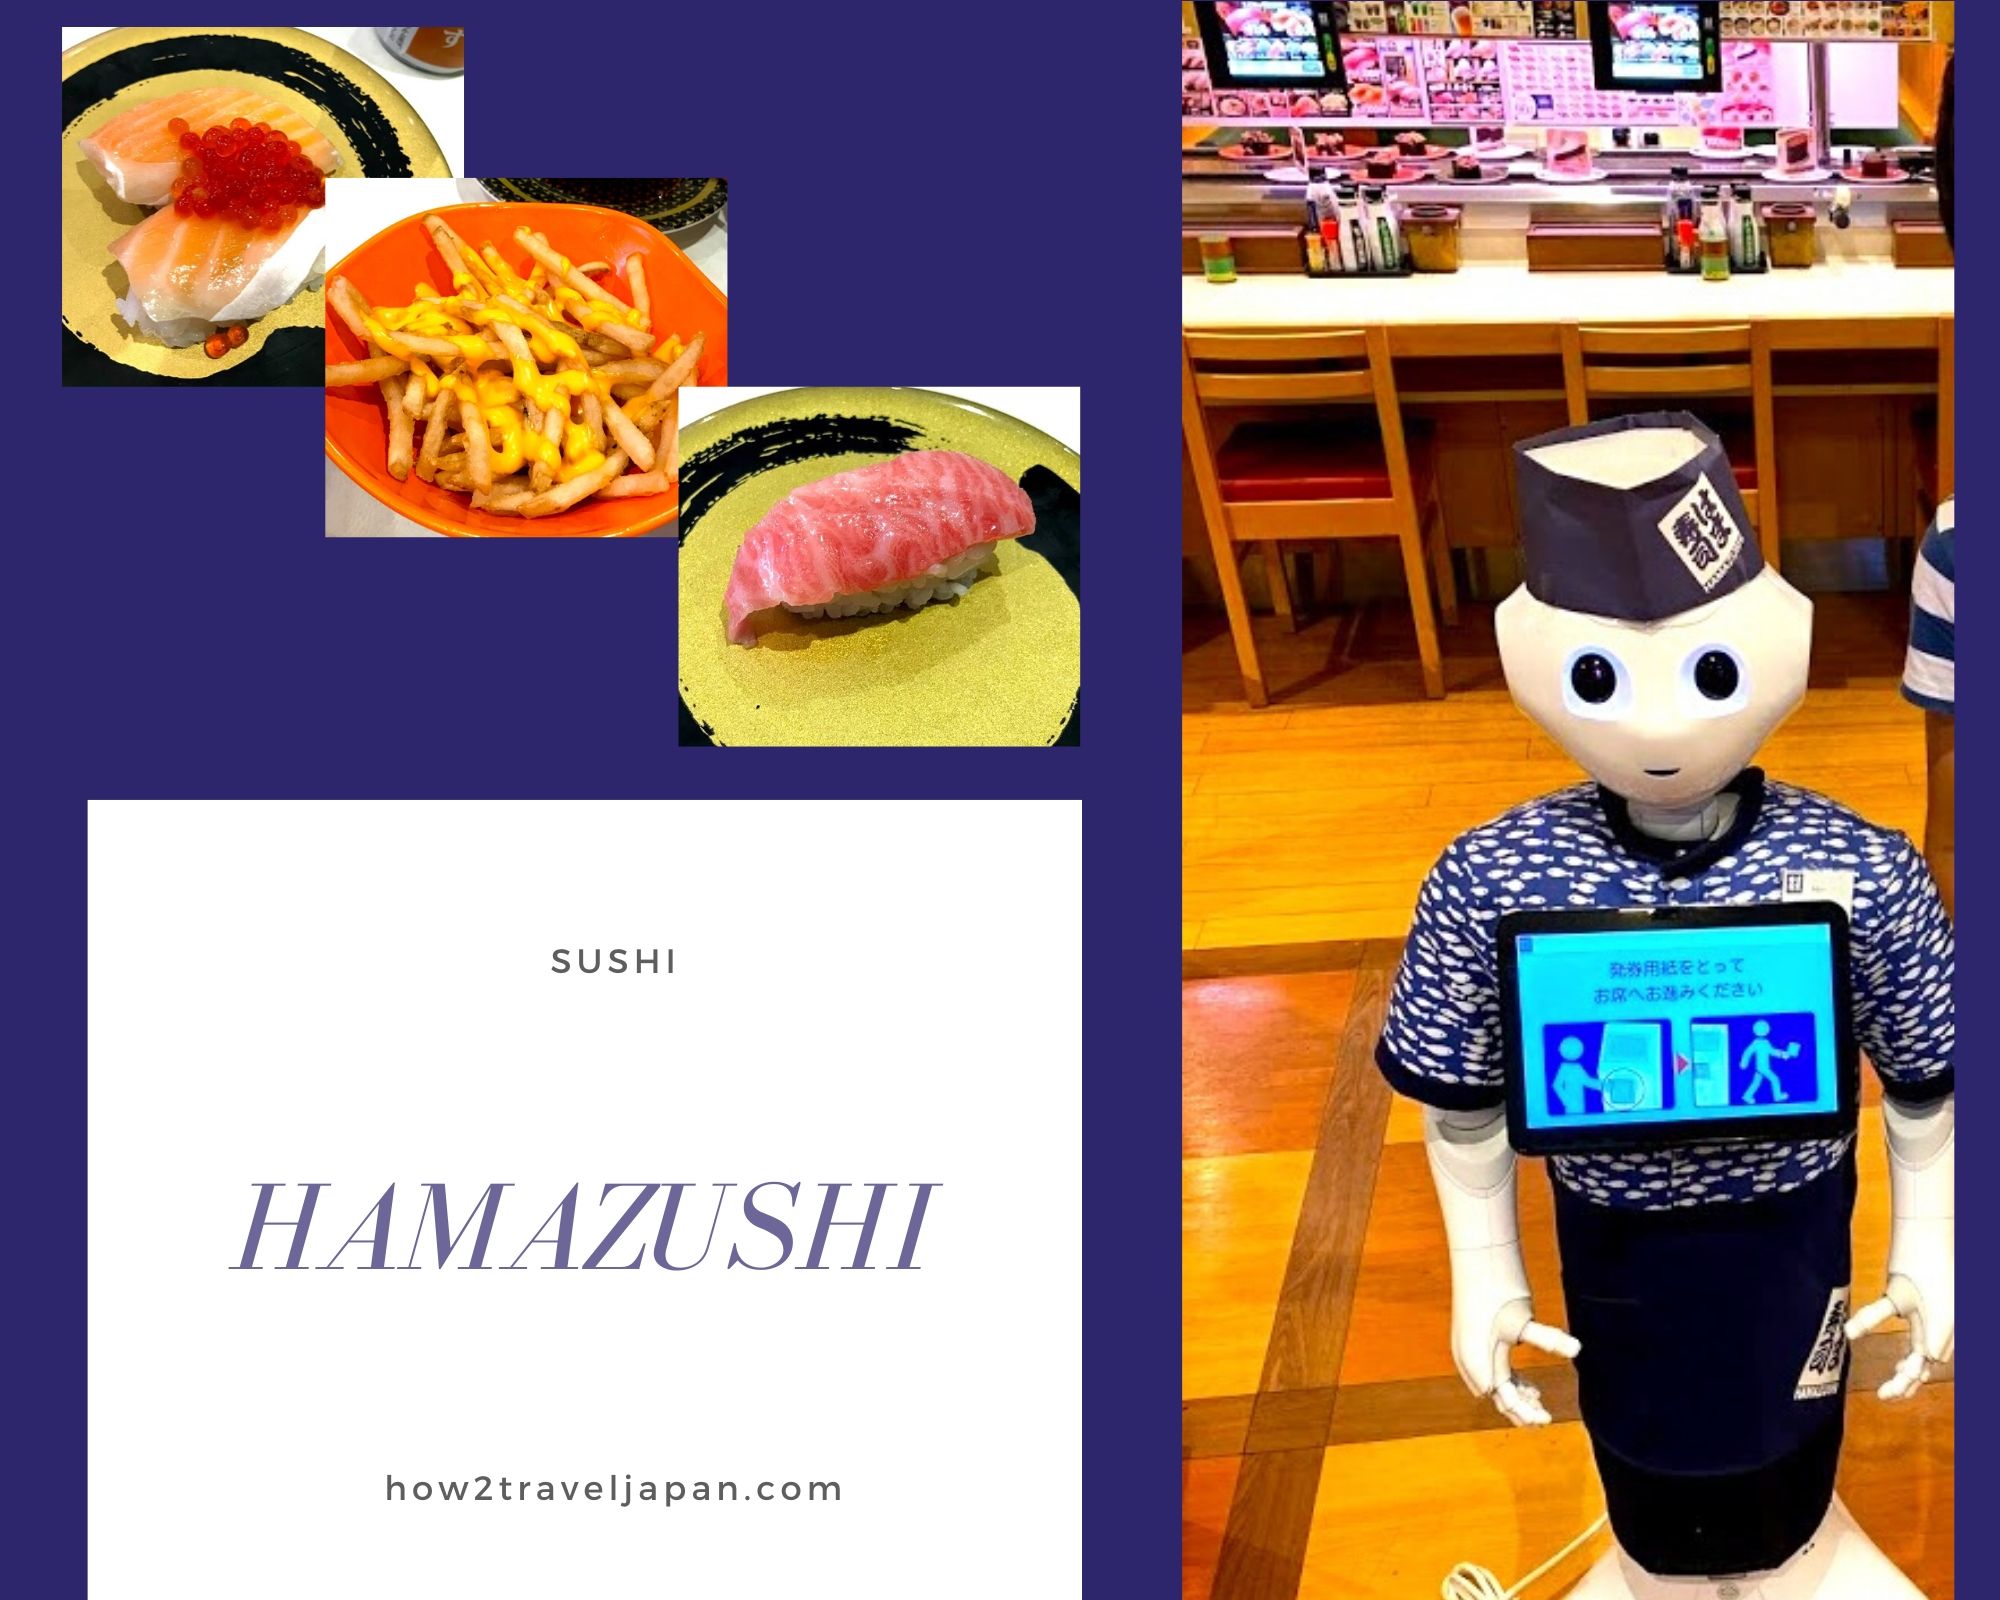 You are currently viewing WE LOVE 【HAMA-ZUSHI】, WE LOVE 【PEPPER】!